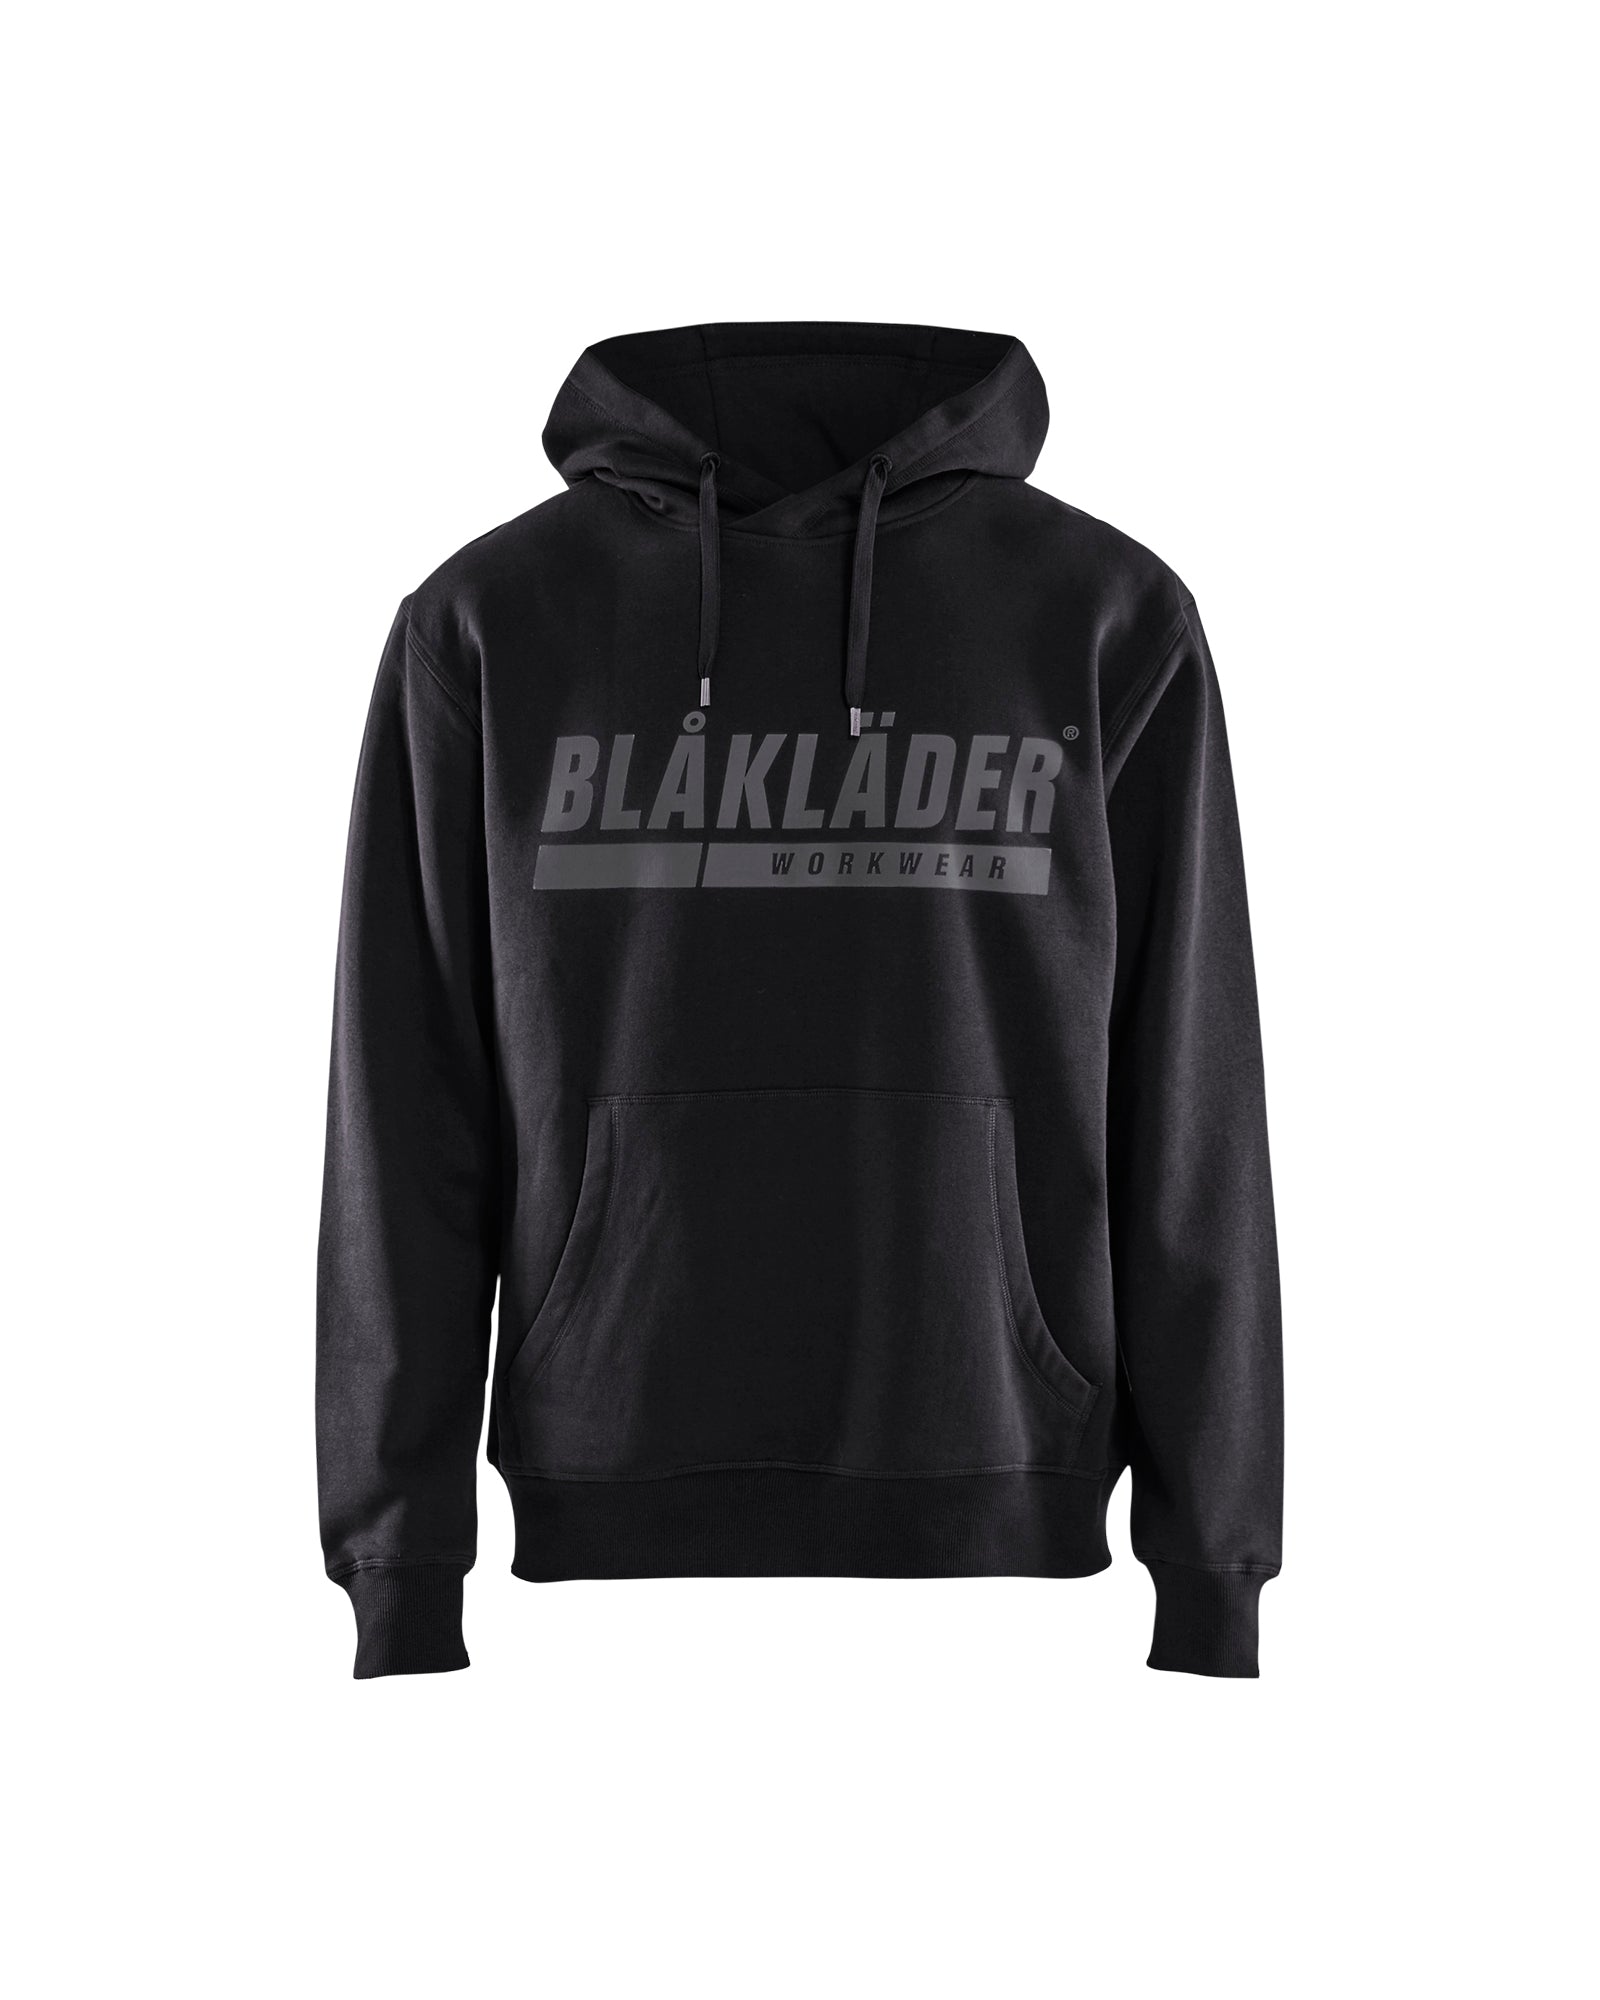 Men's Blaklader Hooded Sweatshirt with Print in Black Profile from the front